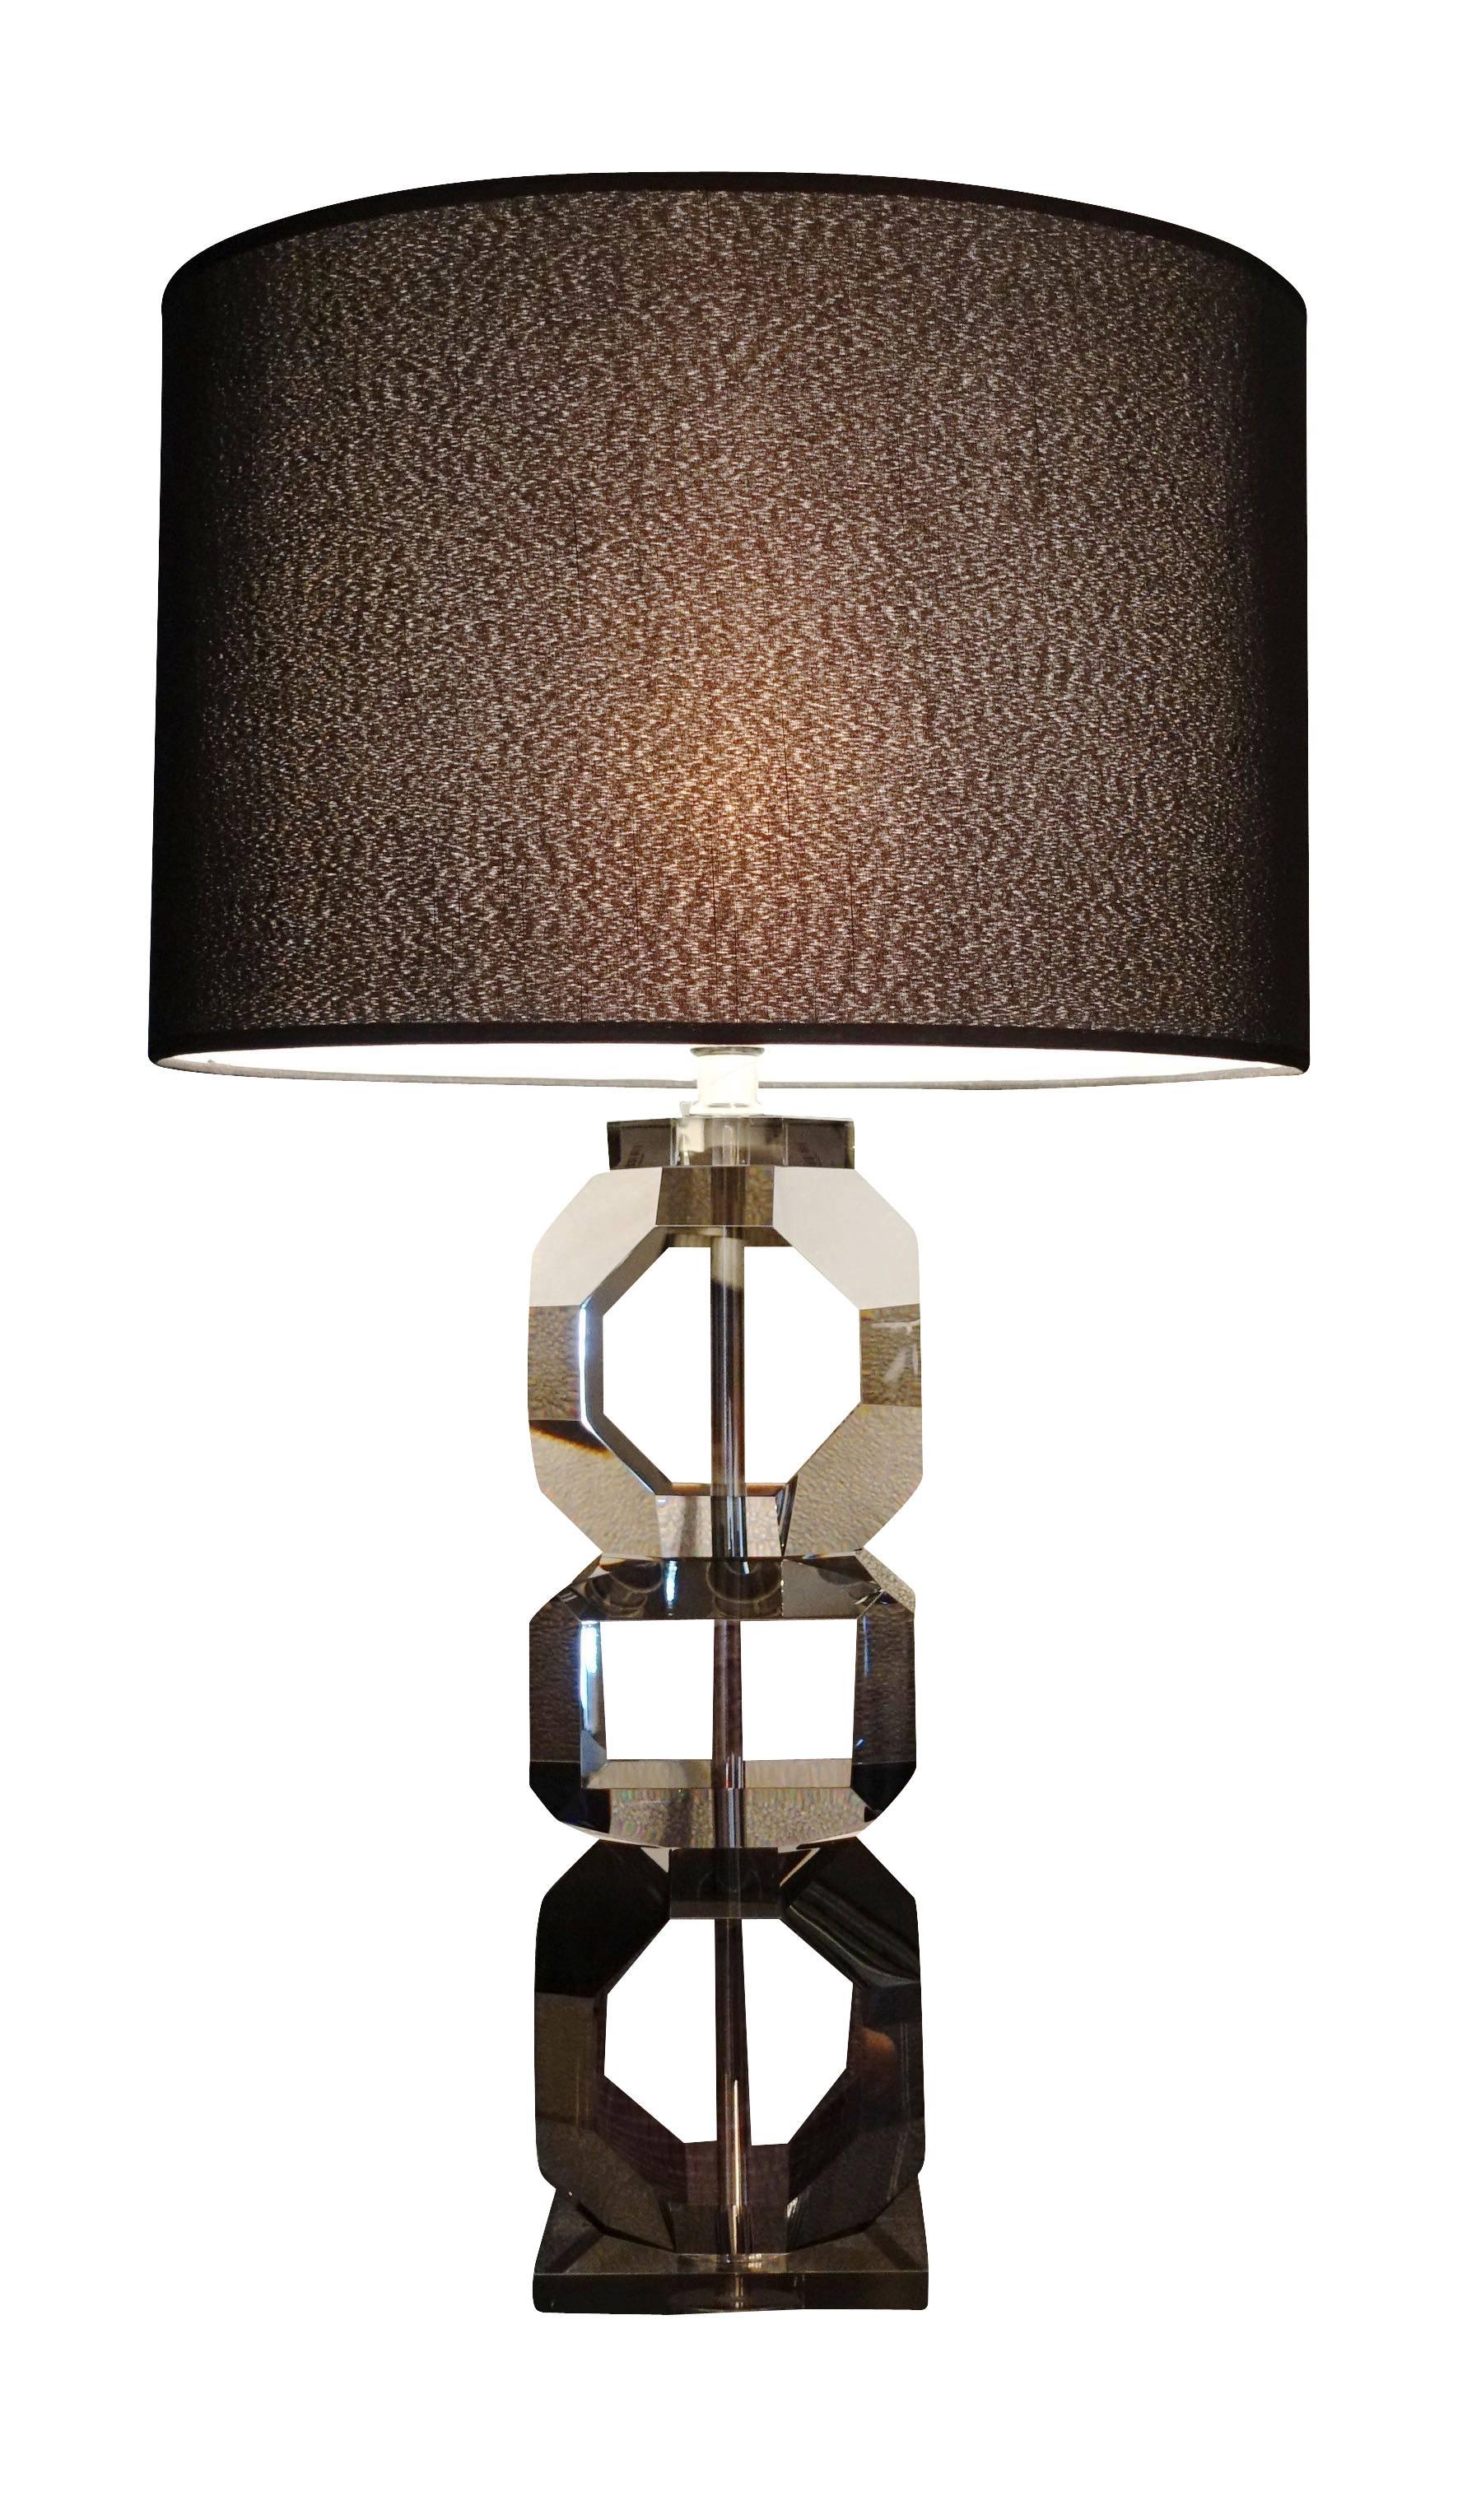 Contemporary Belgian pair of smoked cut crystal stacked cubes create base for lamps.
Round black shade measures 17